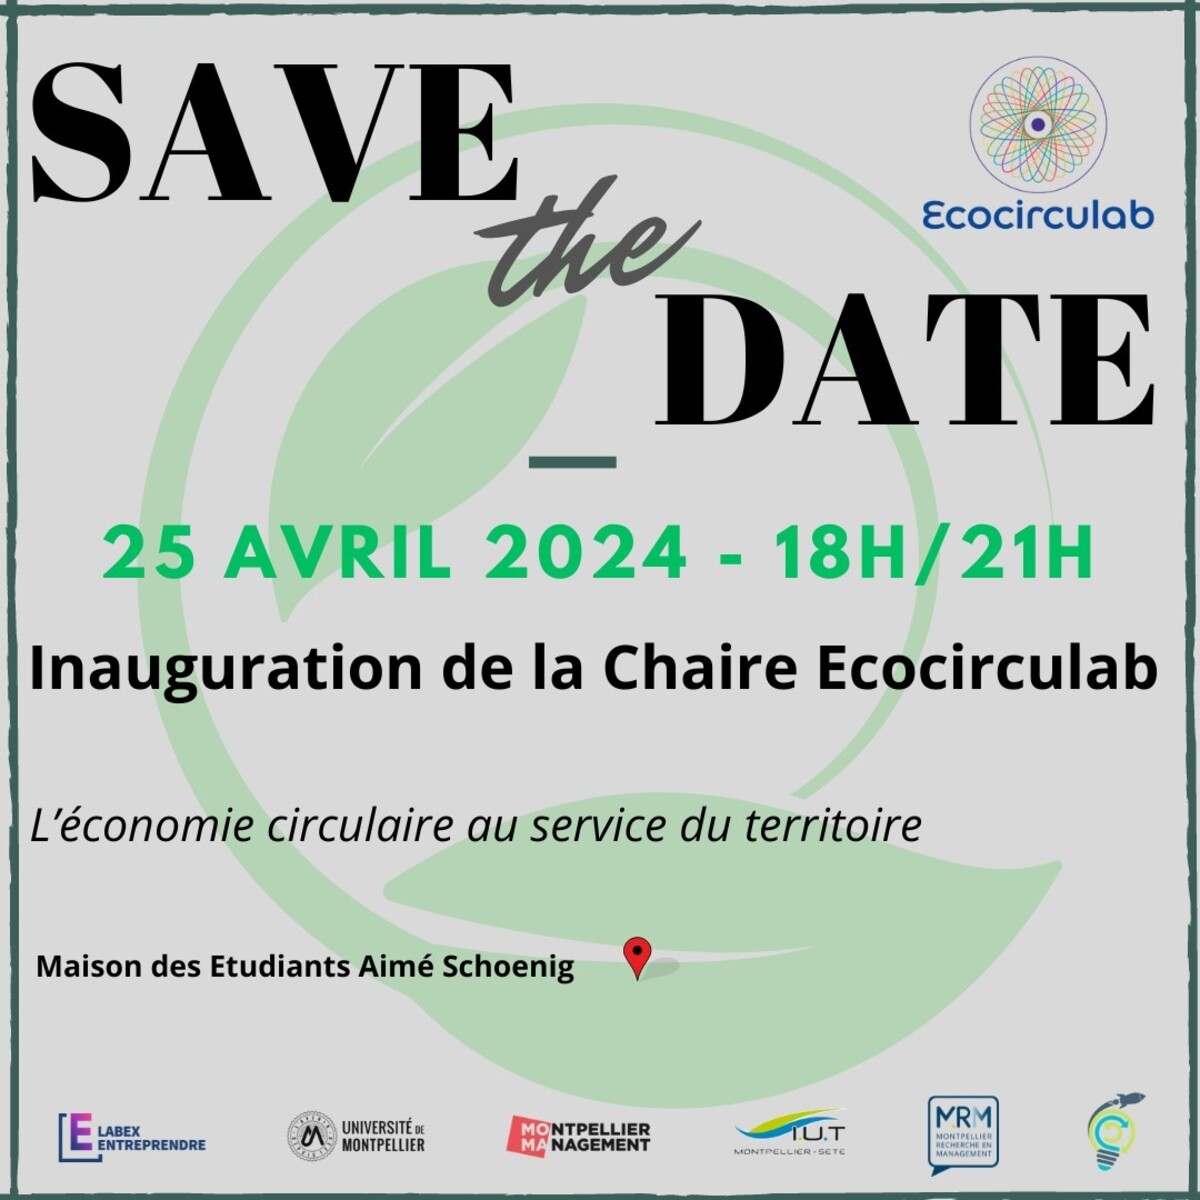 Invitation soirée d'inauguration Chaire Ecocirculab - 25 avril - Montpellier